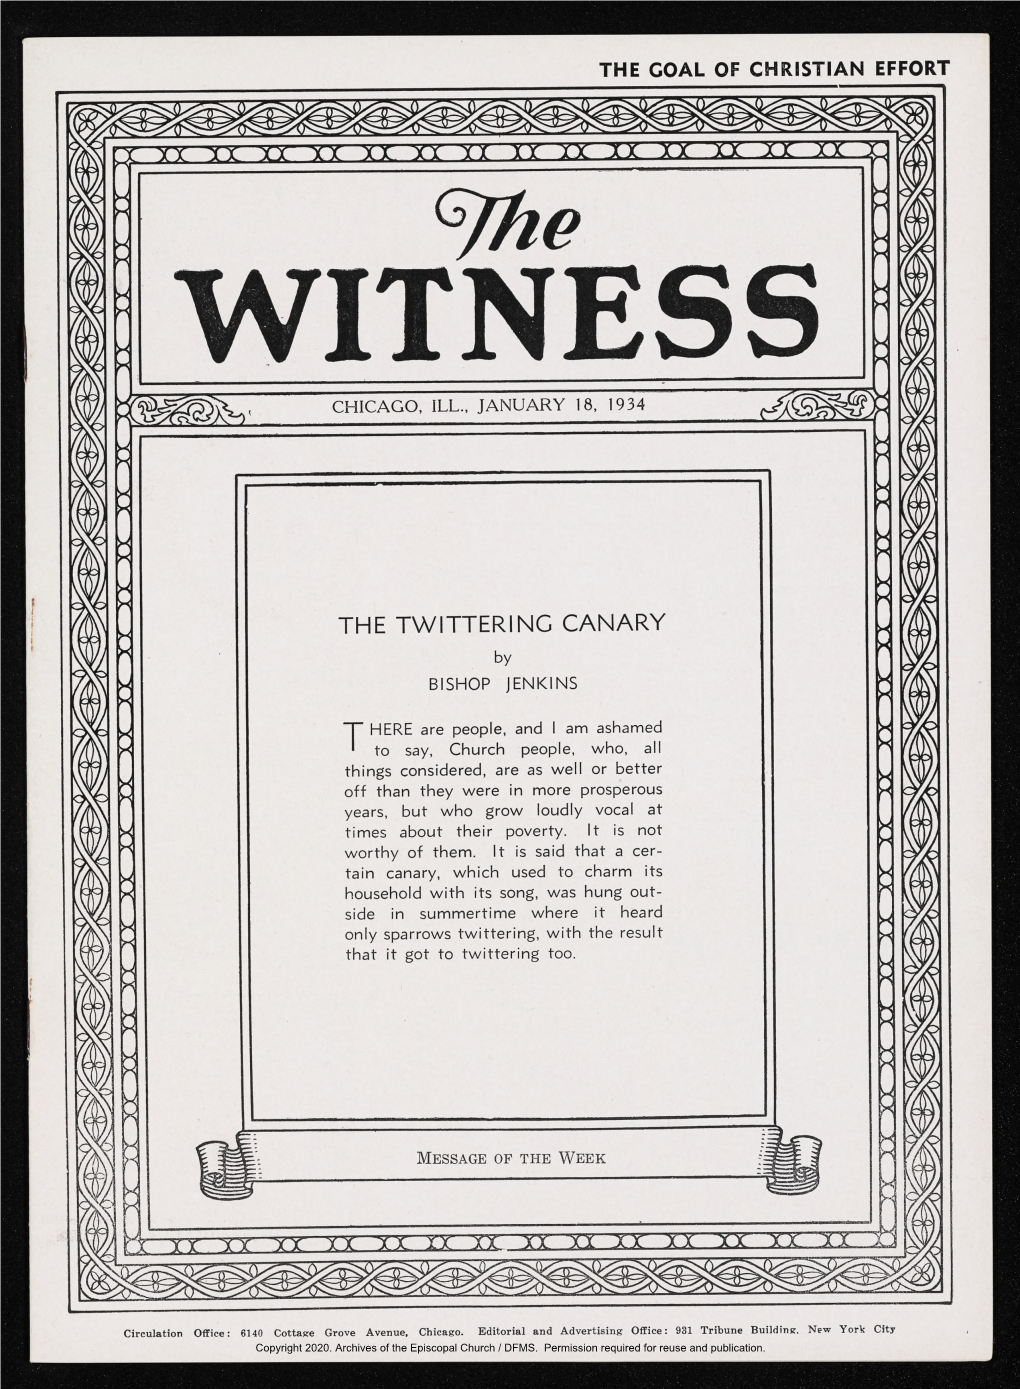 1934 the Witness, Vol. 18, No. 20. January 18, 1934